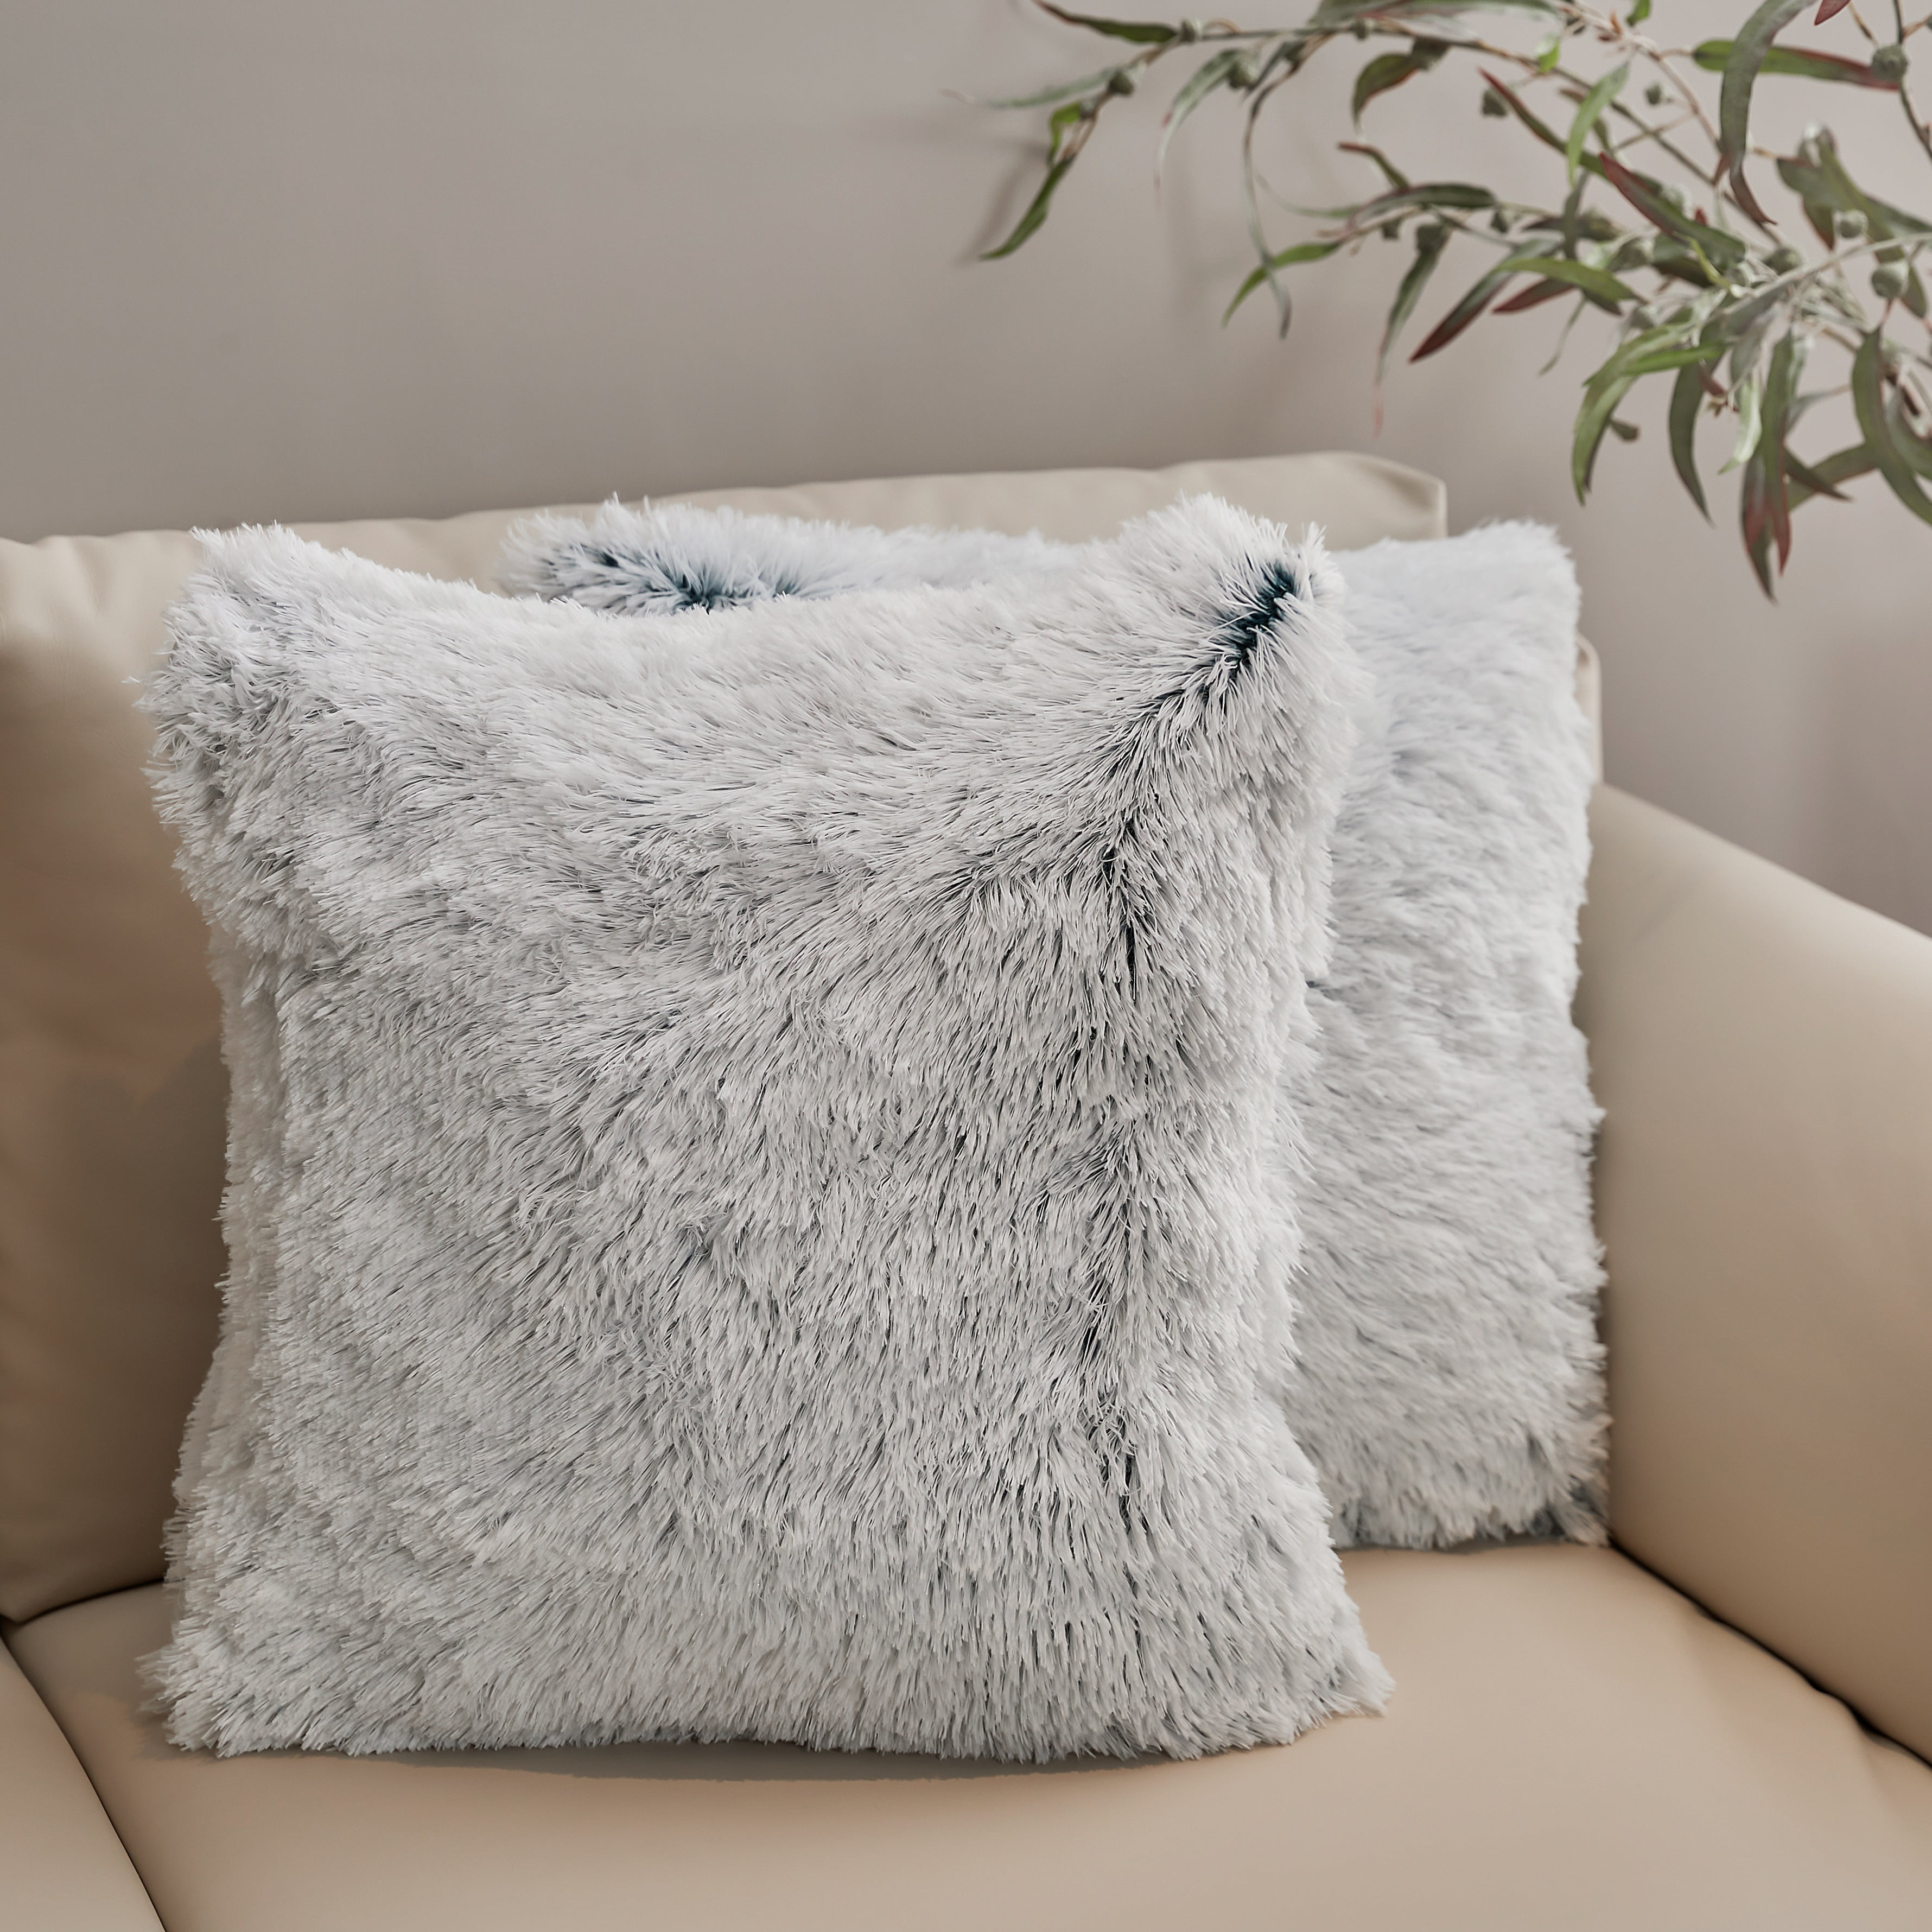 Cheer Collection Microsherpa Throw Pillow Ultra Soft and Fluffy, Elega